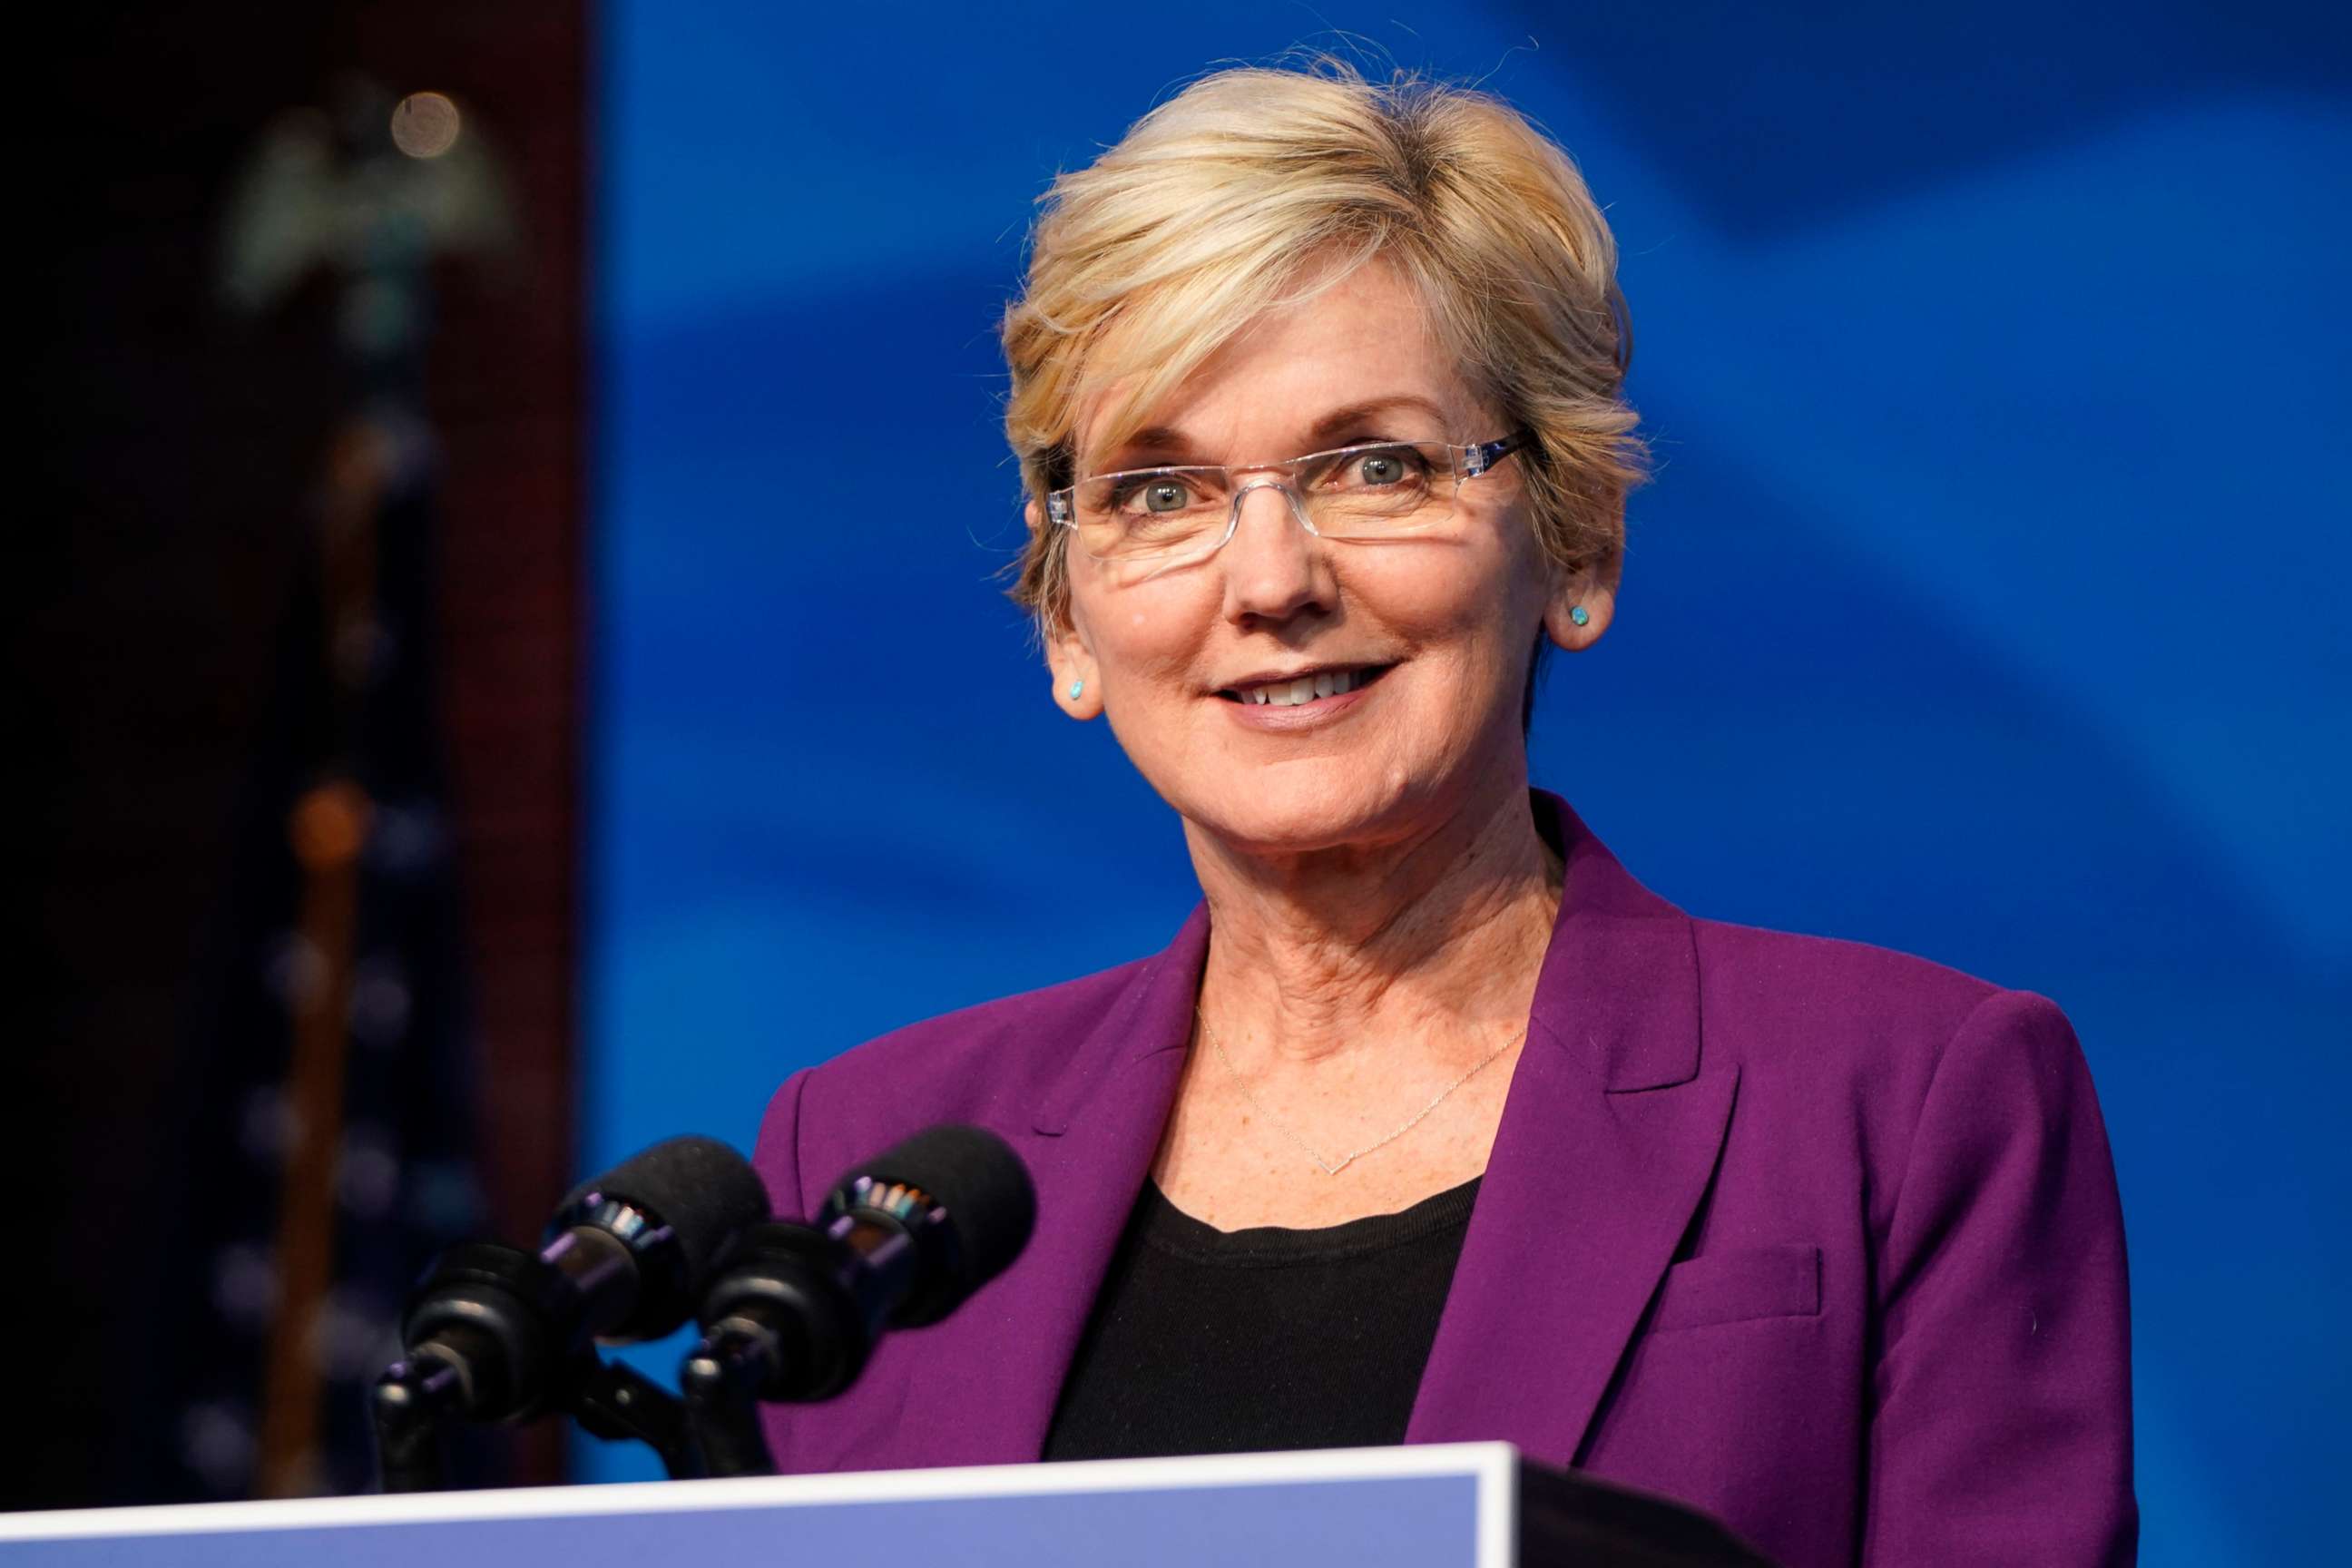 PHOTO: Nominee for Secretary of Energy, Jennifer Granholm, speaks at the Queen theater on Dec. 19, 2020, in Wilmington, Del.